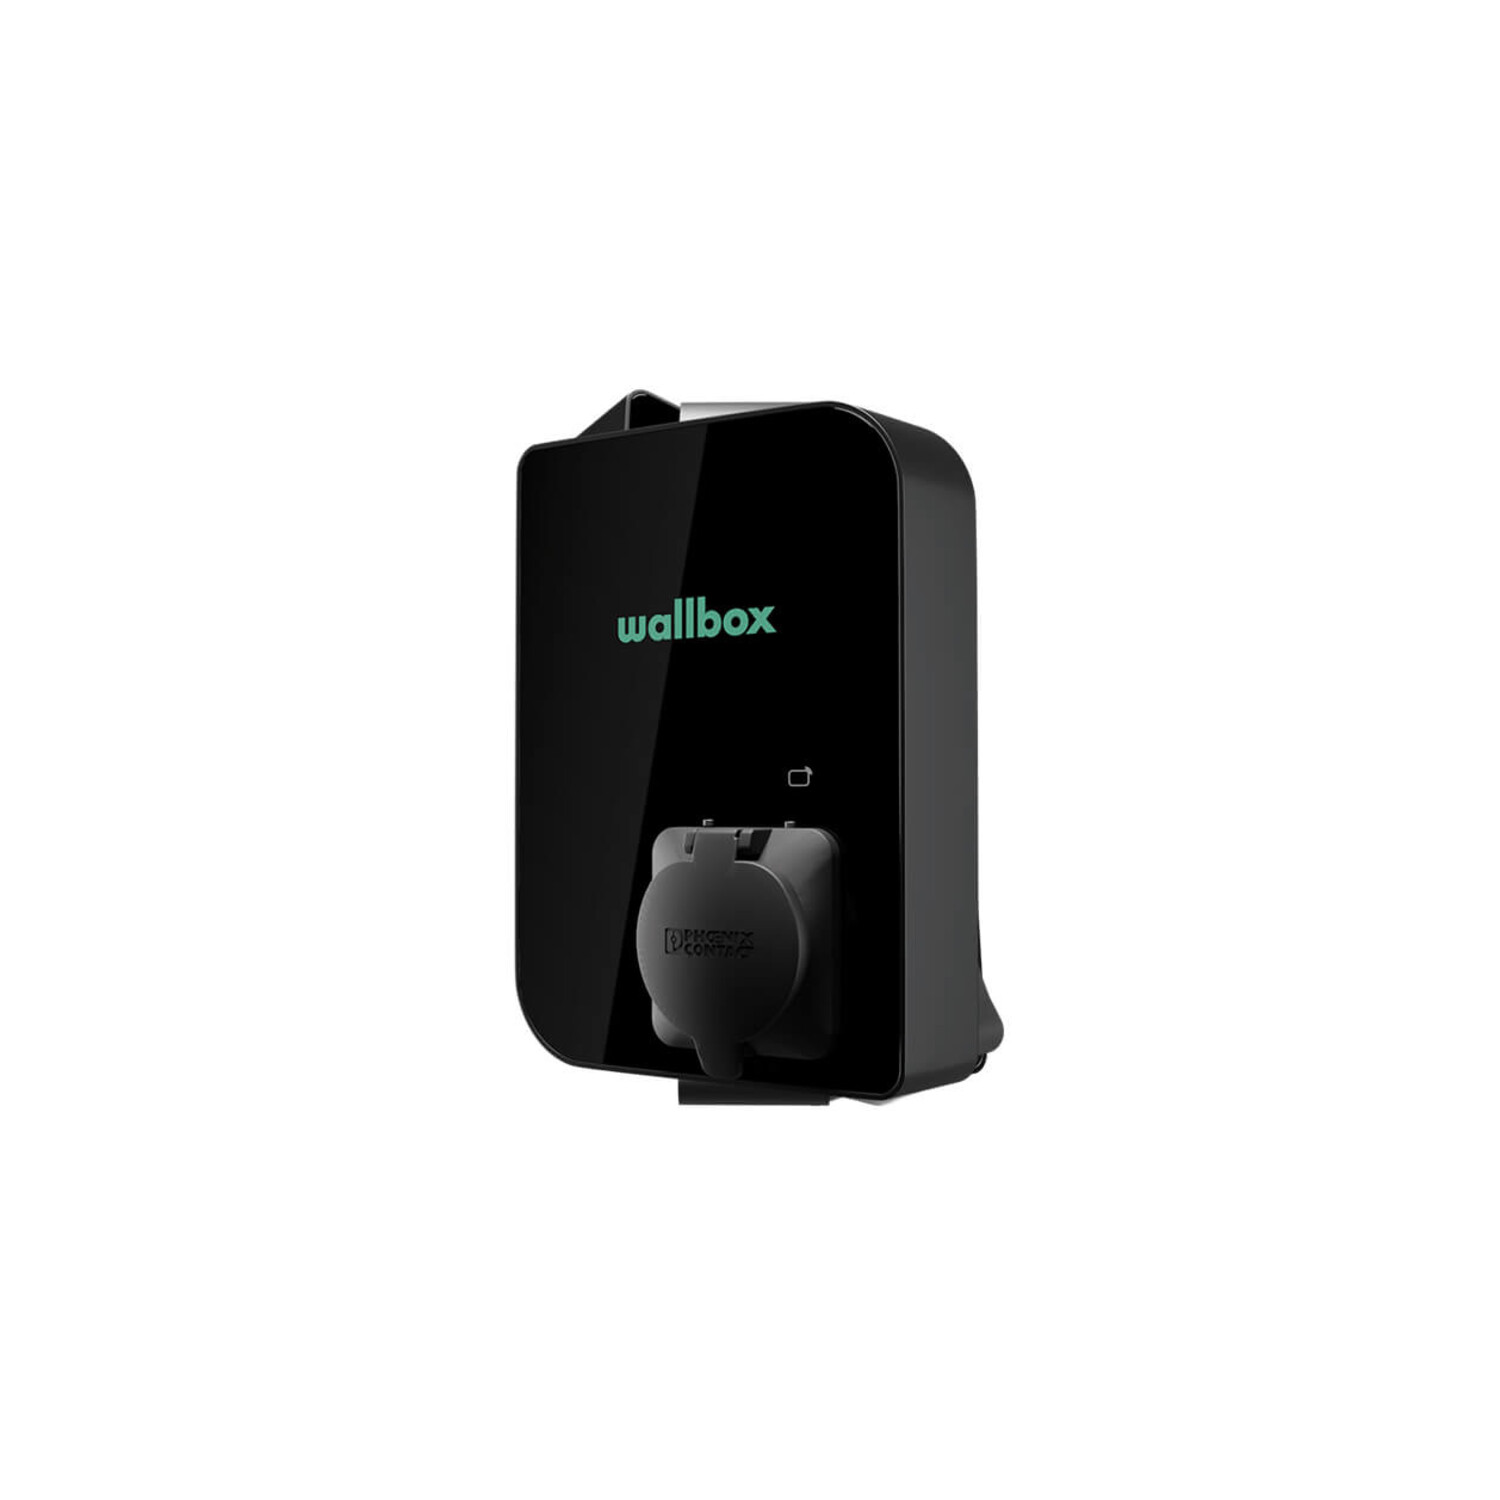 Wallbox Kit Copper SB electric charger, type 2, 22kW + Powerboost 3 phase  65A/EM340, Black